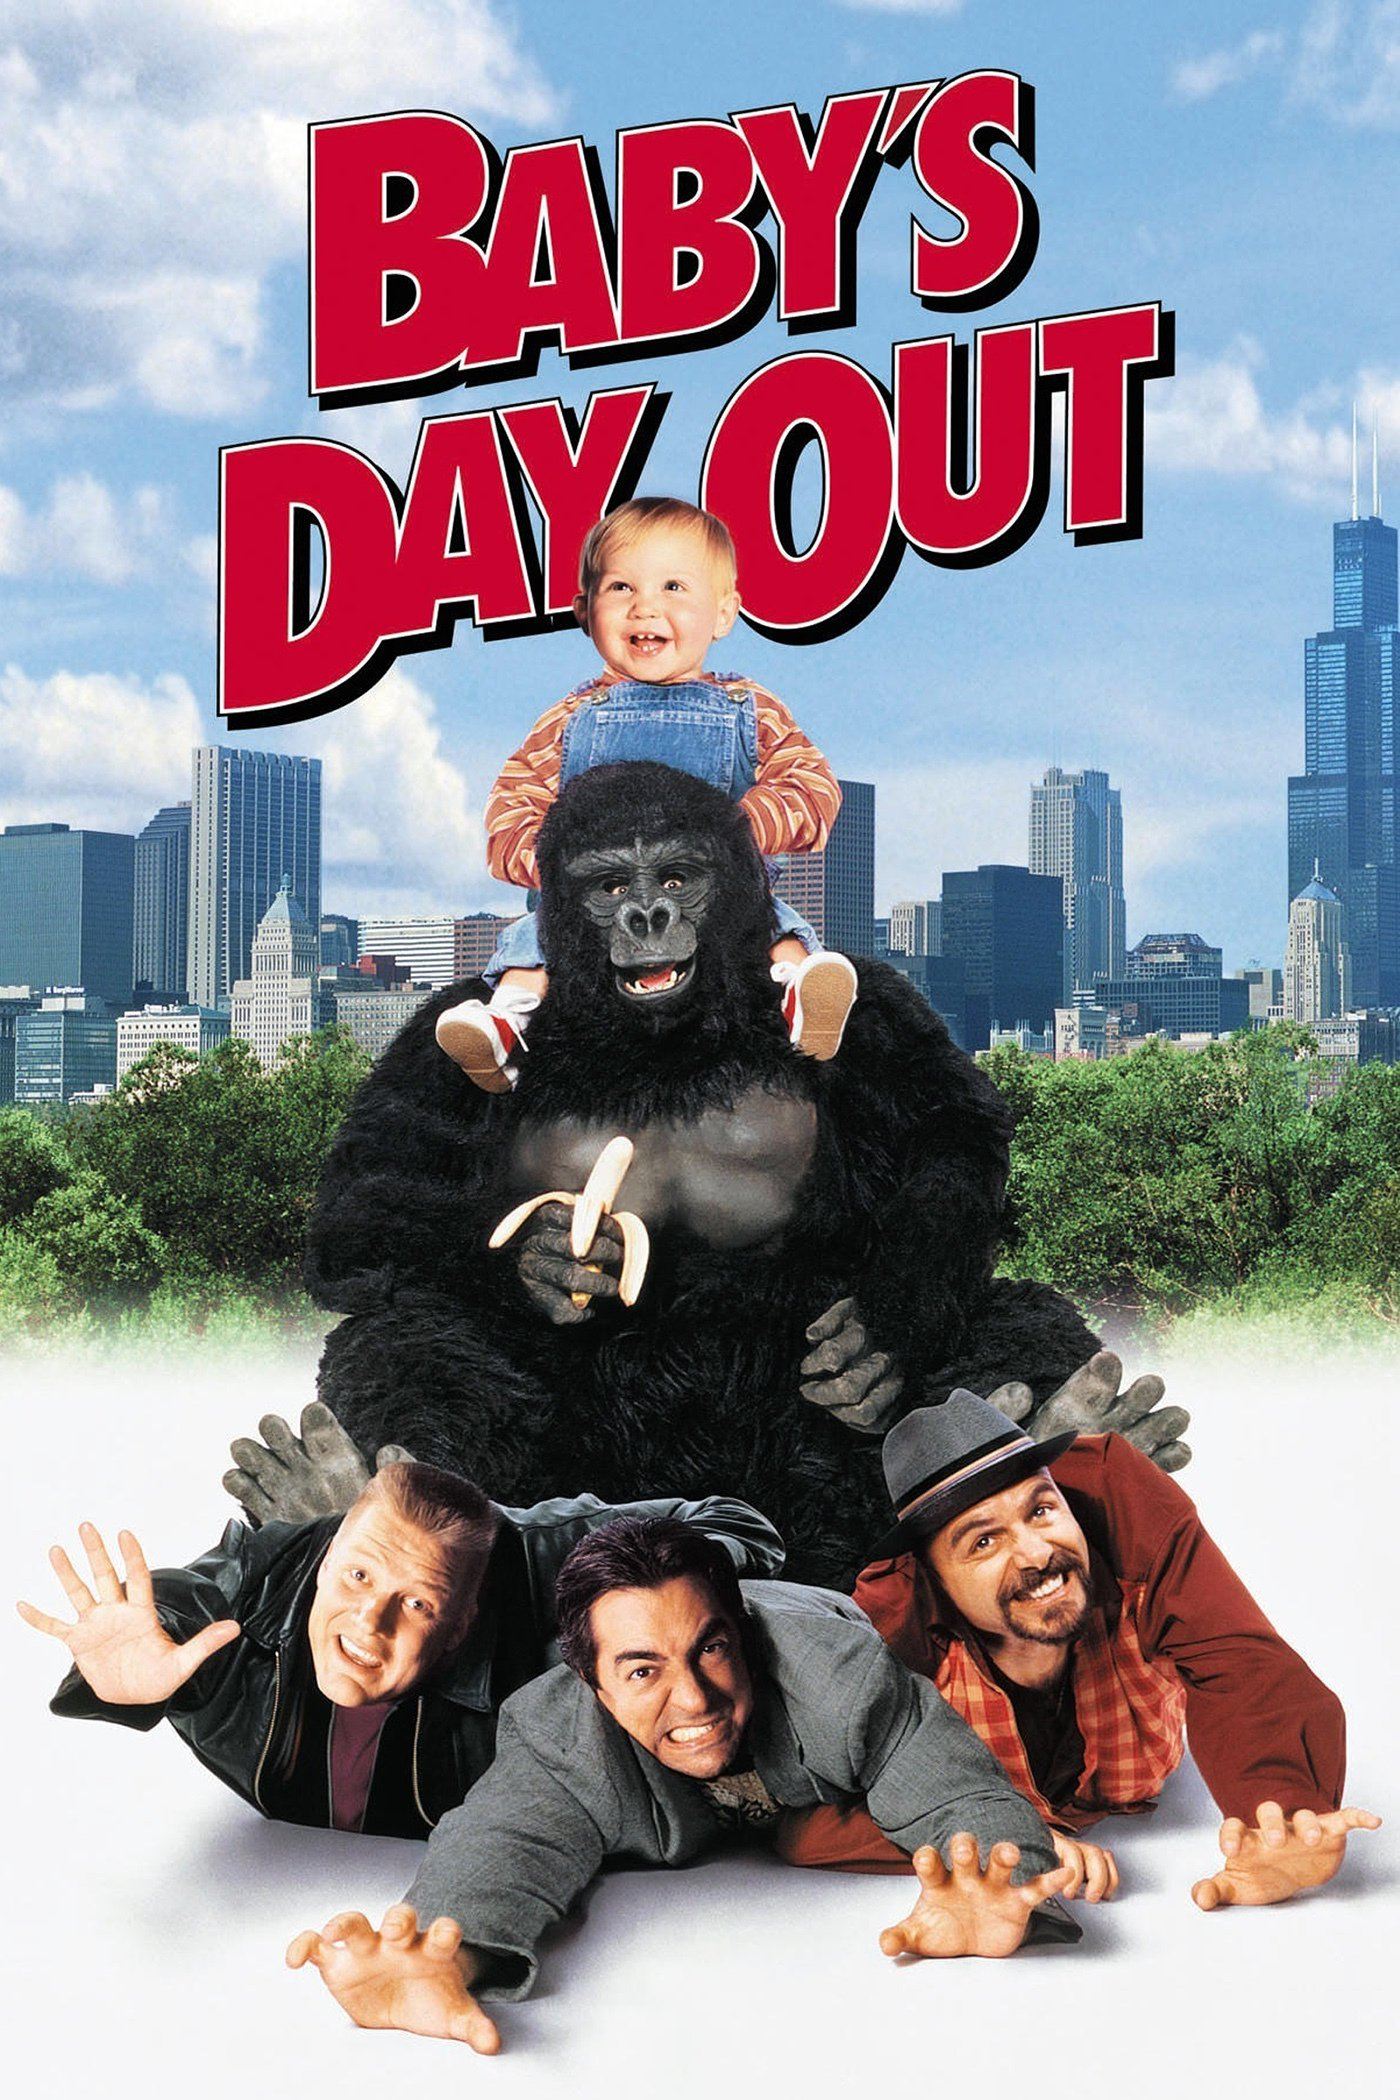 FULL MOVIE: Baby’s Day Out (1994)